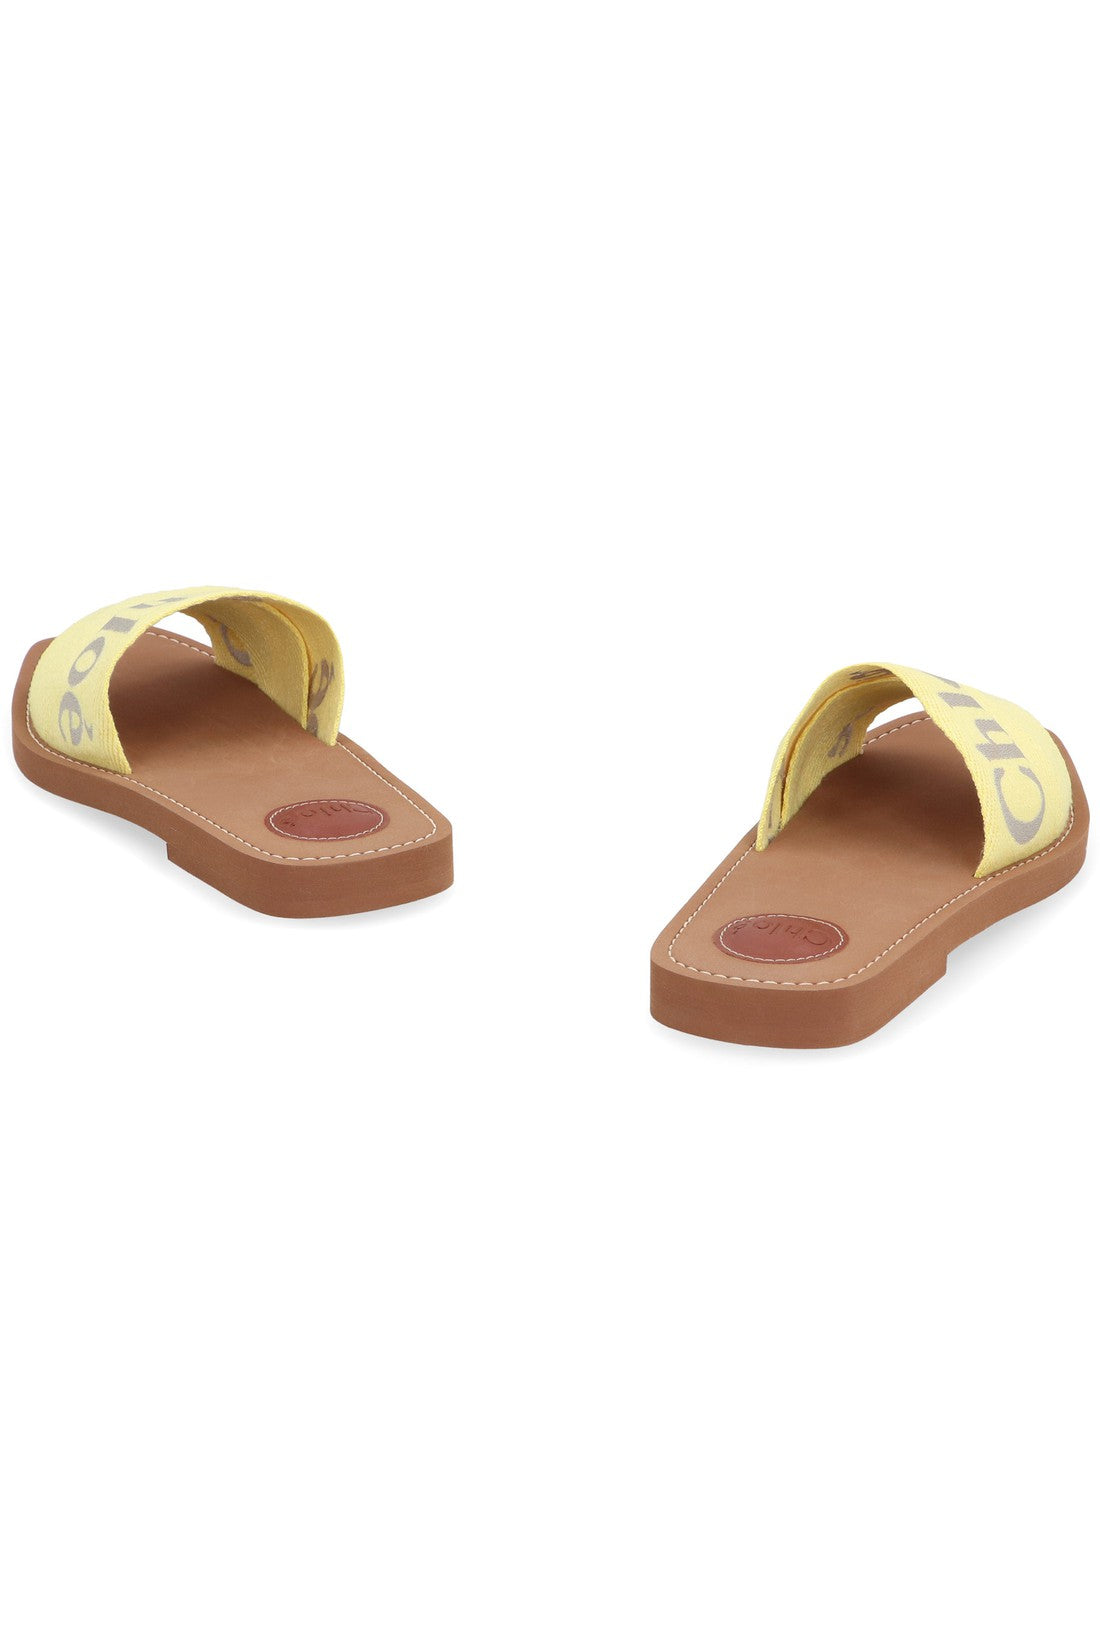 Chloé-OUTLET-SALE-Woody leather and fabric slides-ARCHIVIST